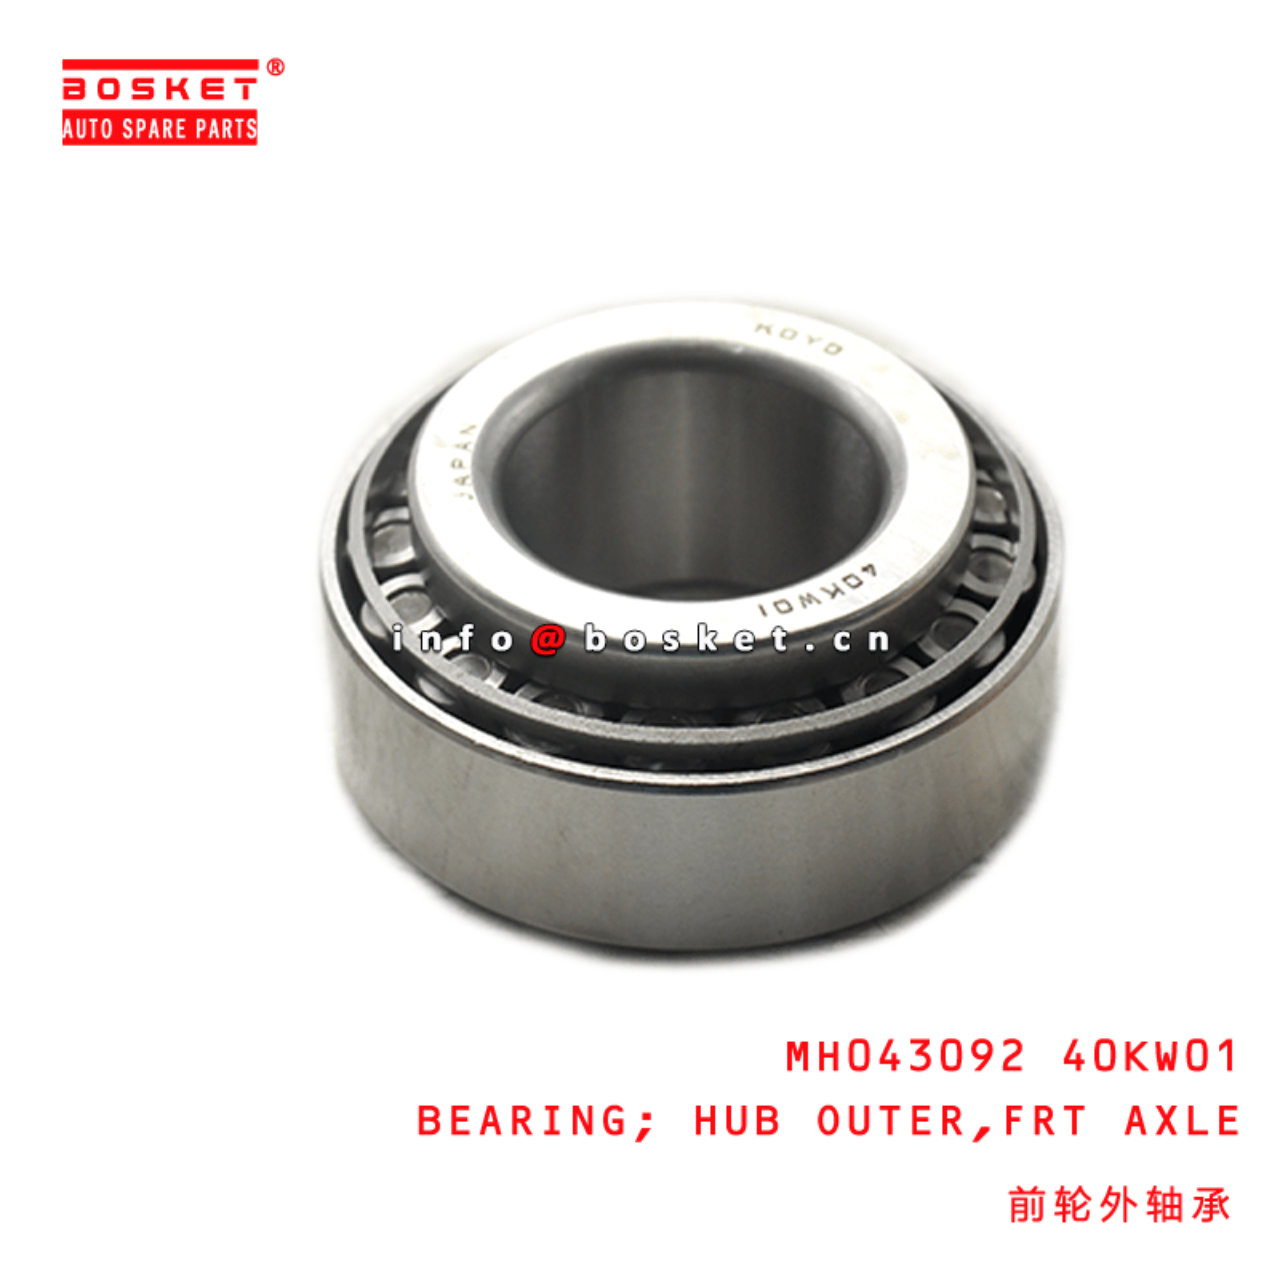 MH043092 40KW01 Front Axle Hub Outer Bearing Suitable For MITSUBISHI FUSO MMC FUSO